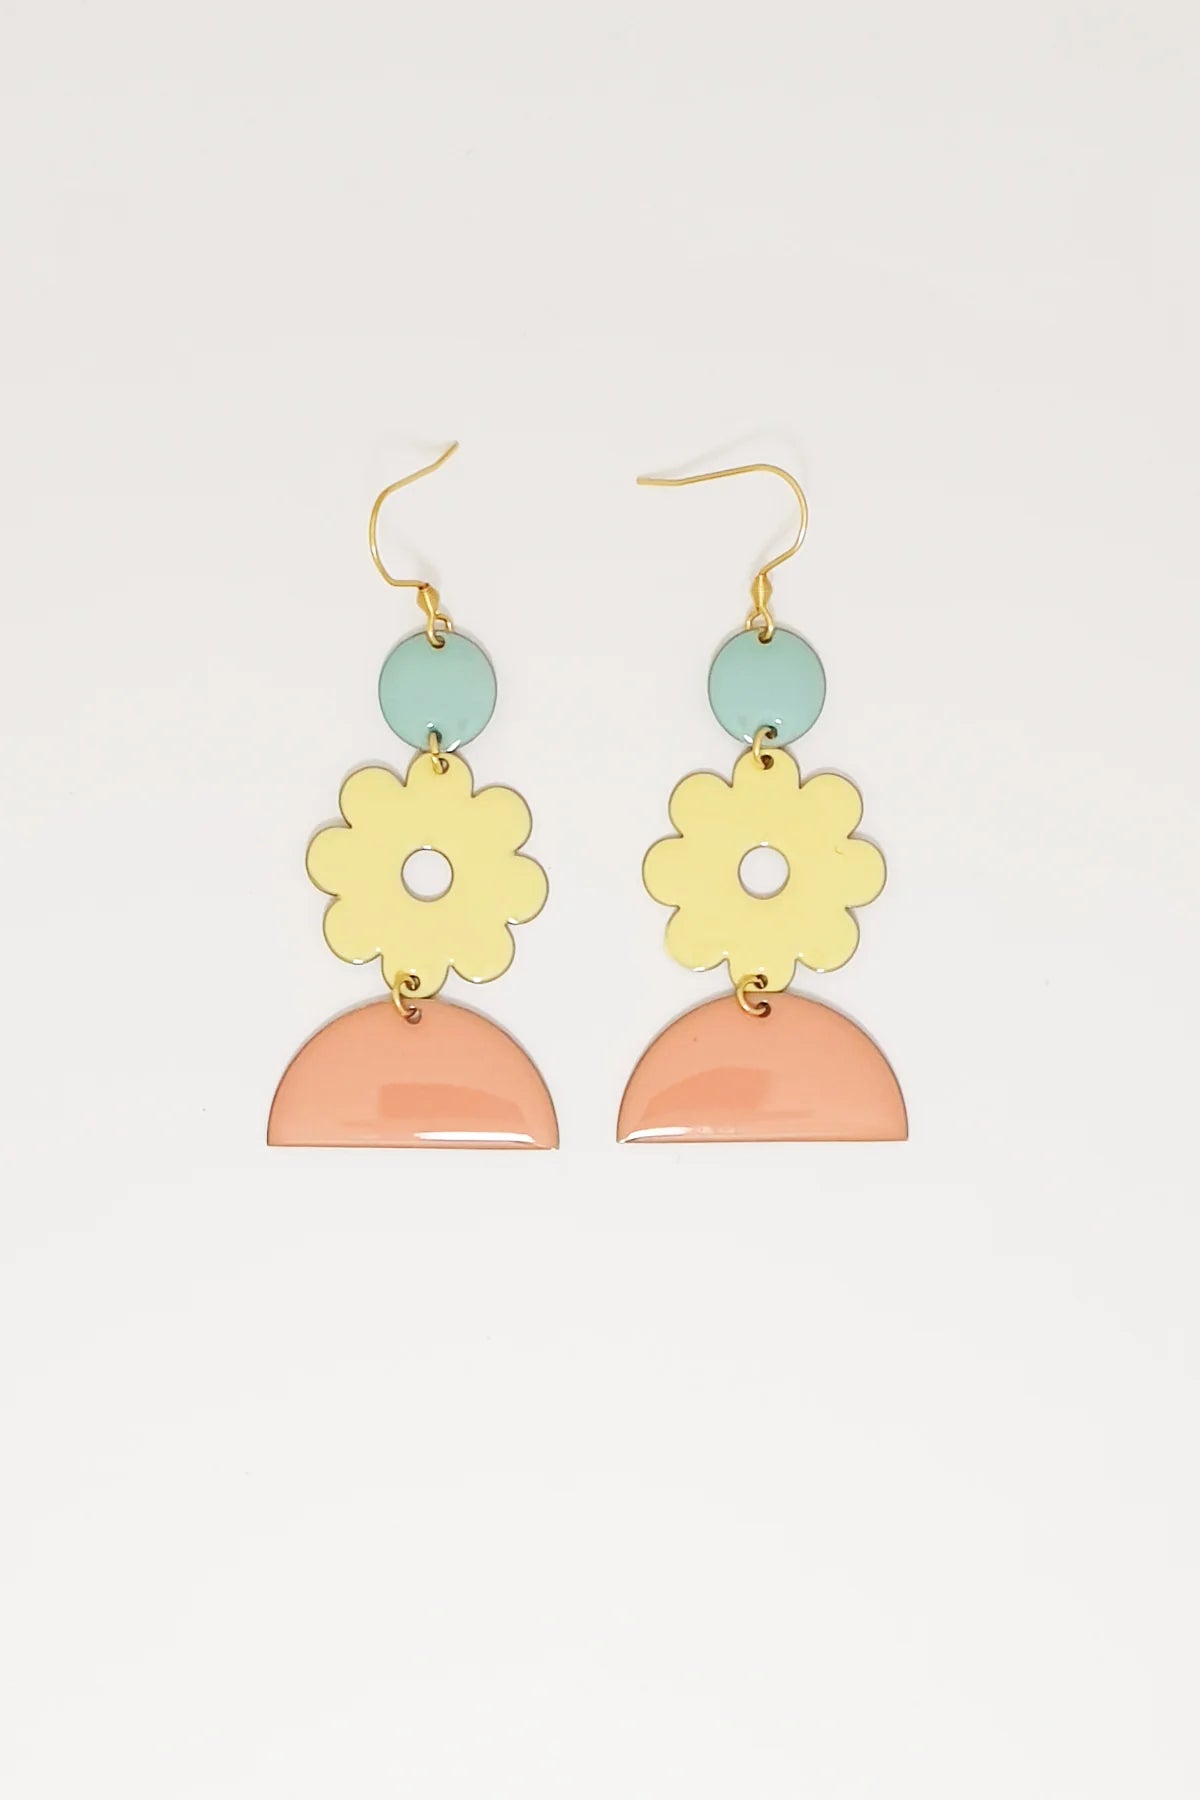 Middle Child - Penpal Earrings - The Ivy Room Adelaide